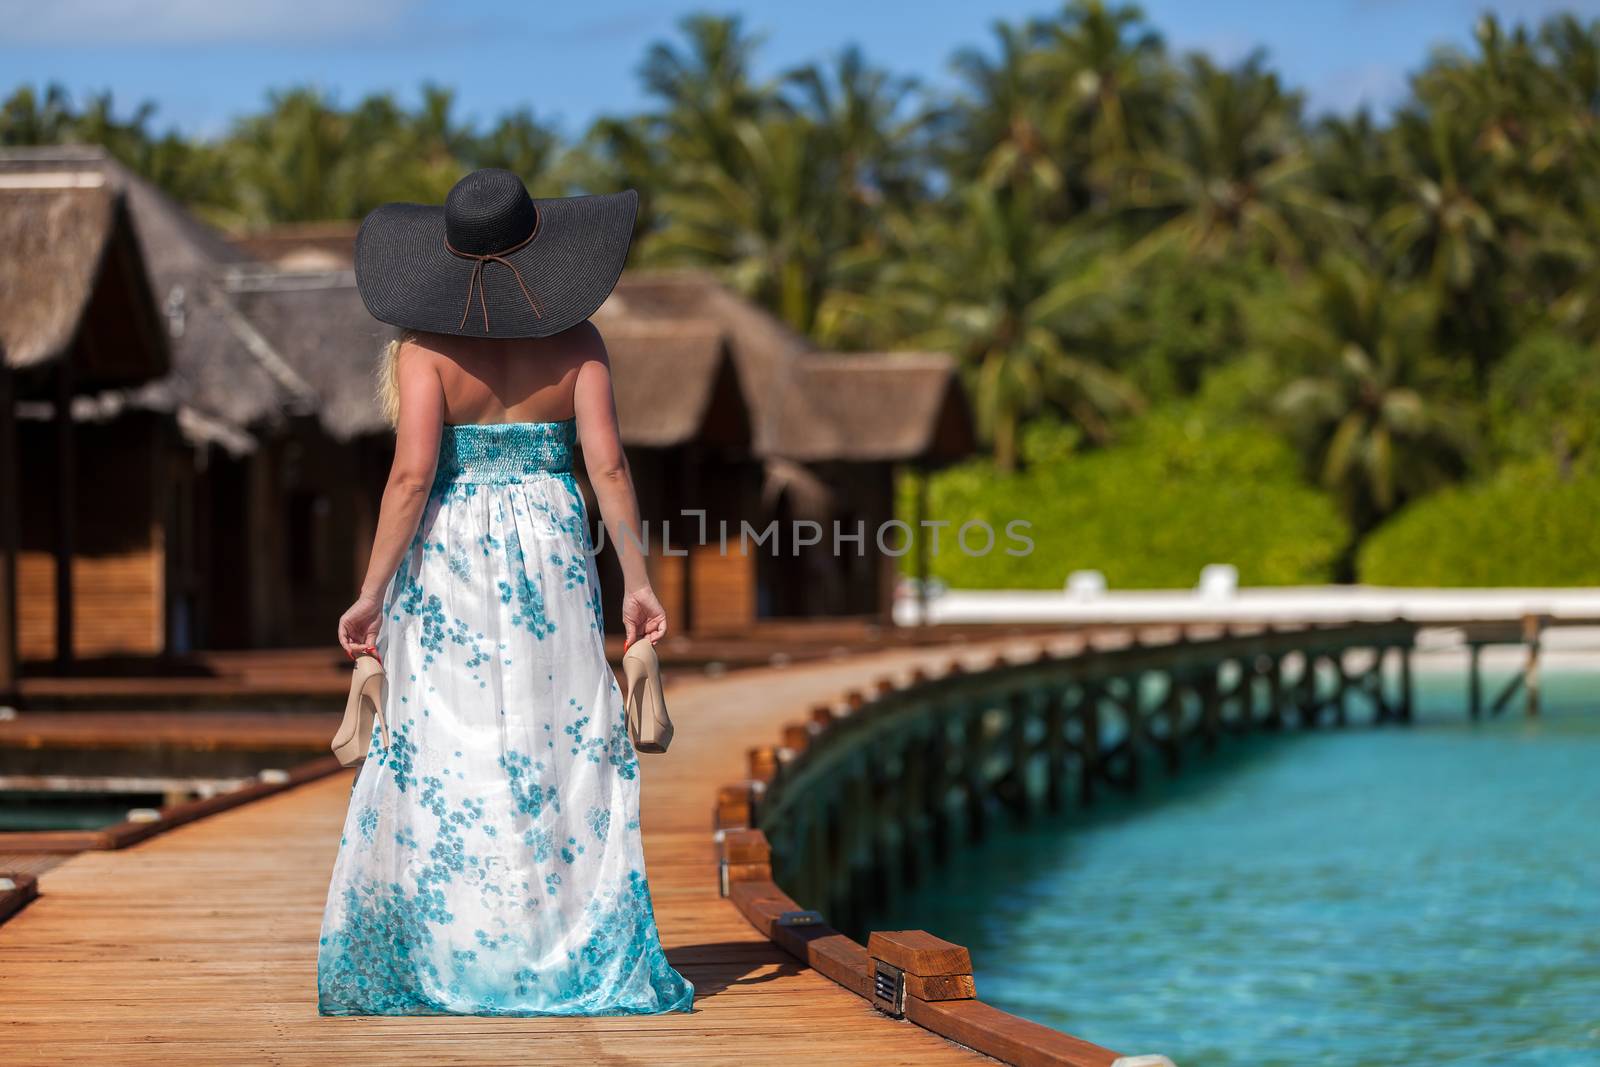 Maldives, young woman walking along the bridge with high heels in the hand and a black hat